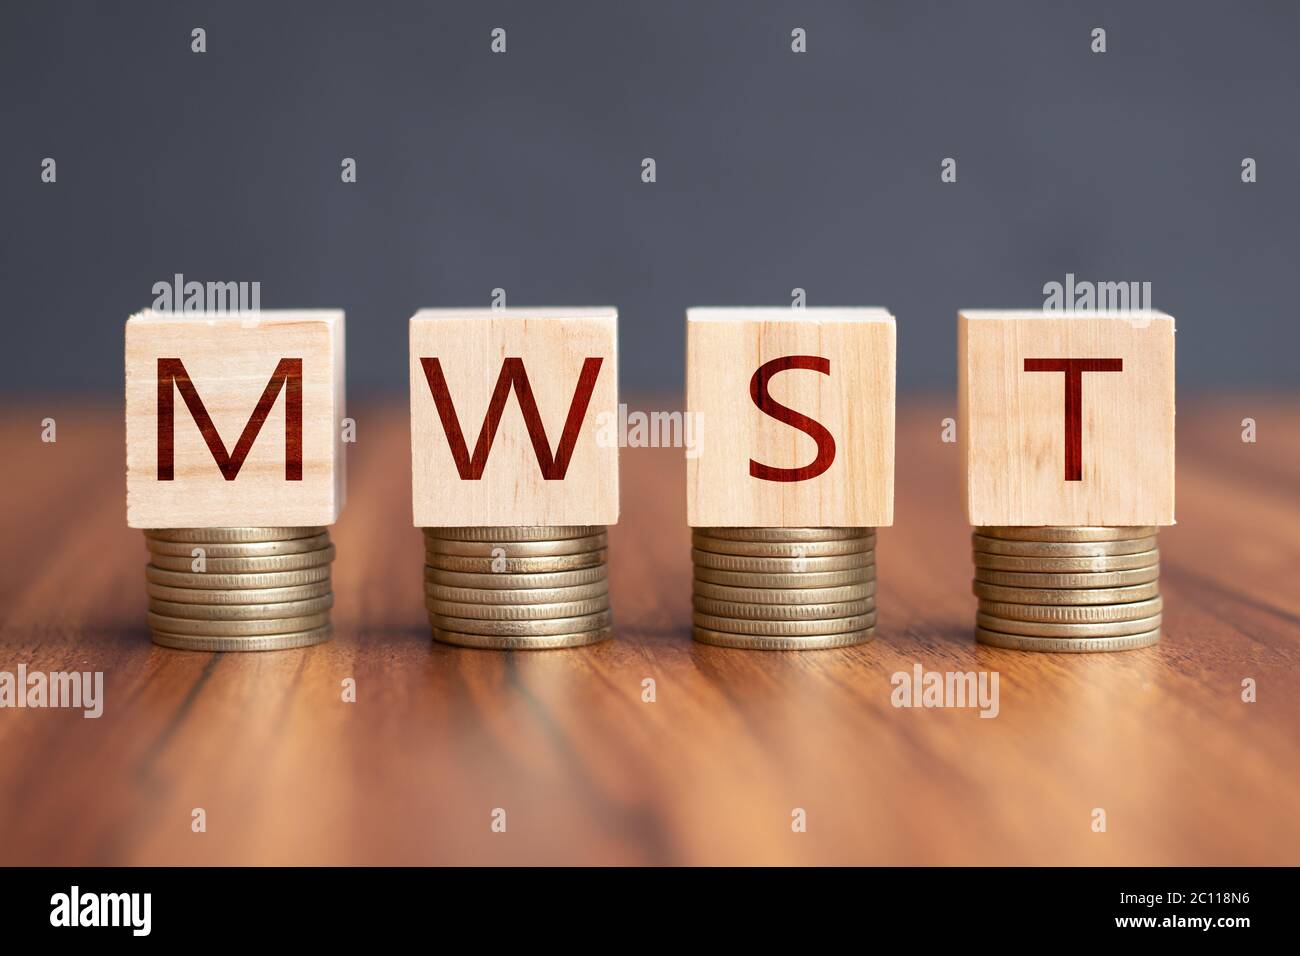 MWST or German Value Added Tax - concept showing of Mehrwertsteuer in tax rates. Stock Photo